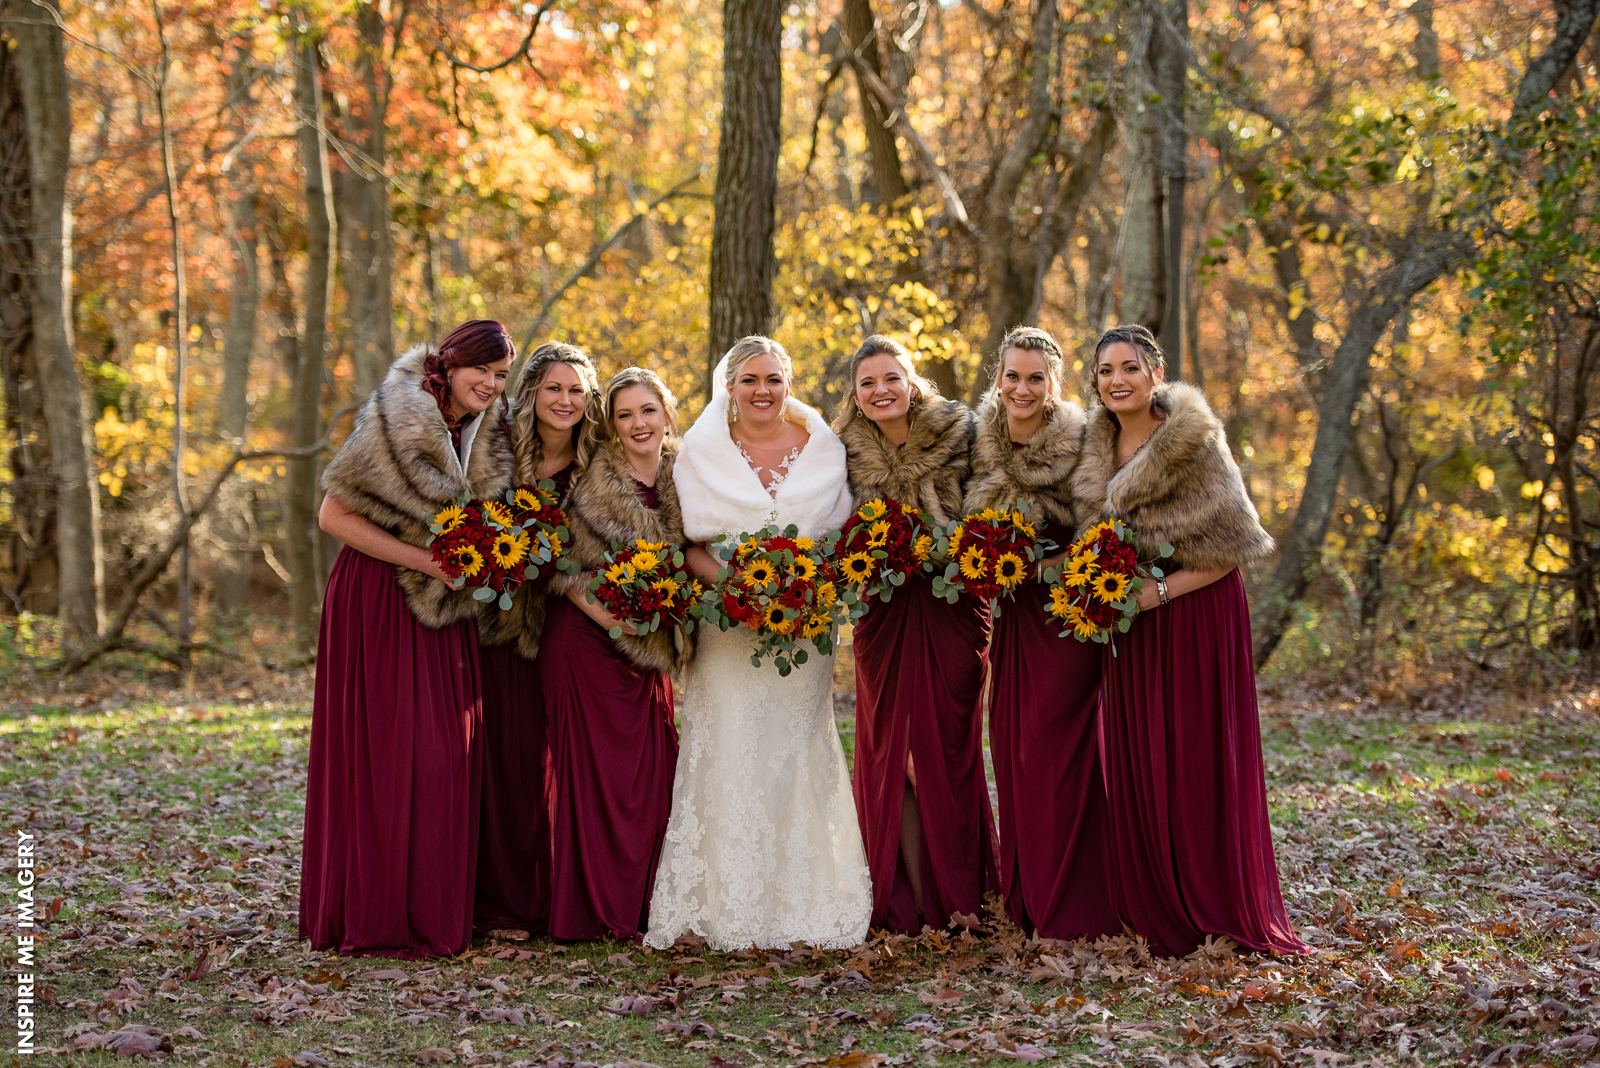 Color Combinations You'll “Fall in Love” With for a Fall Wedding - Crystal  Ballroom, Freehold NJ